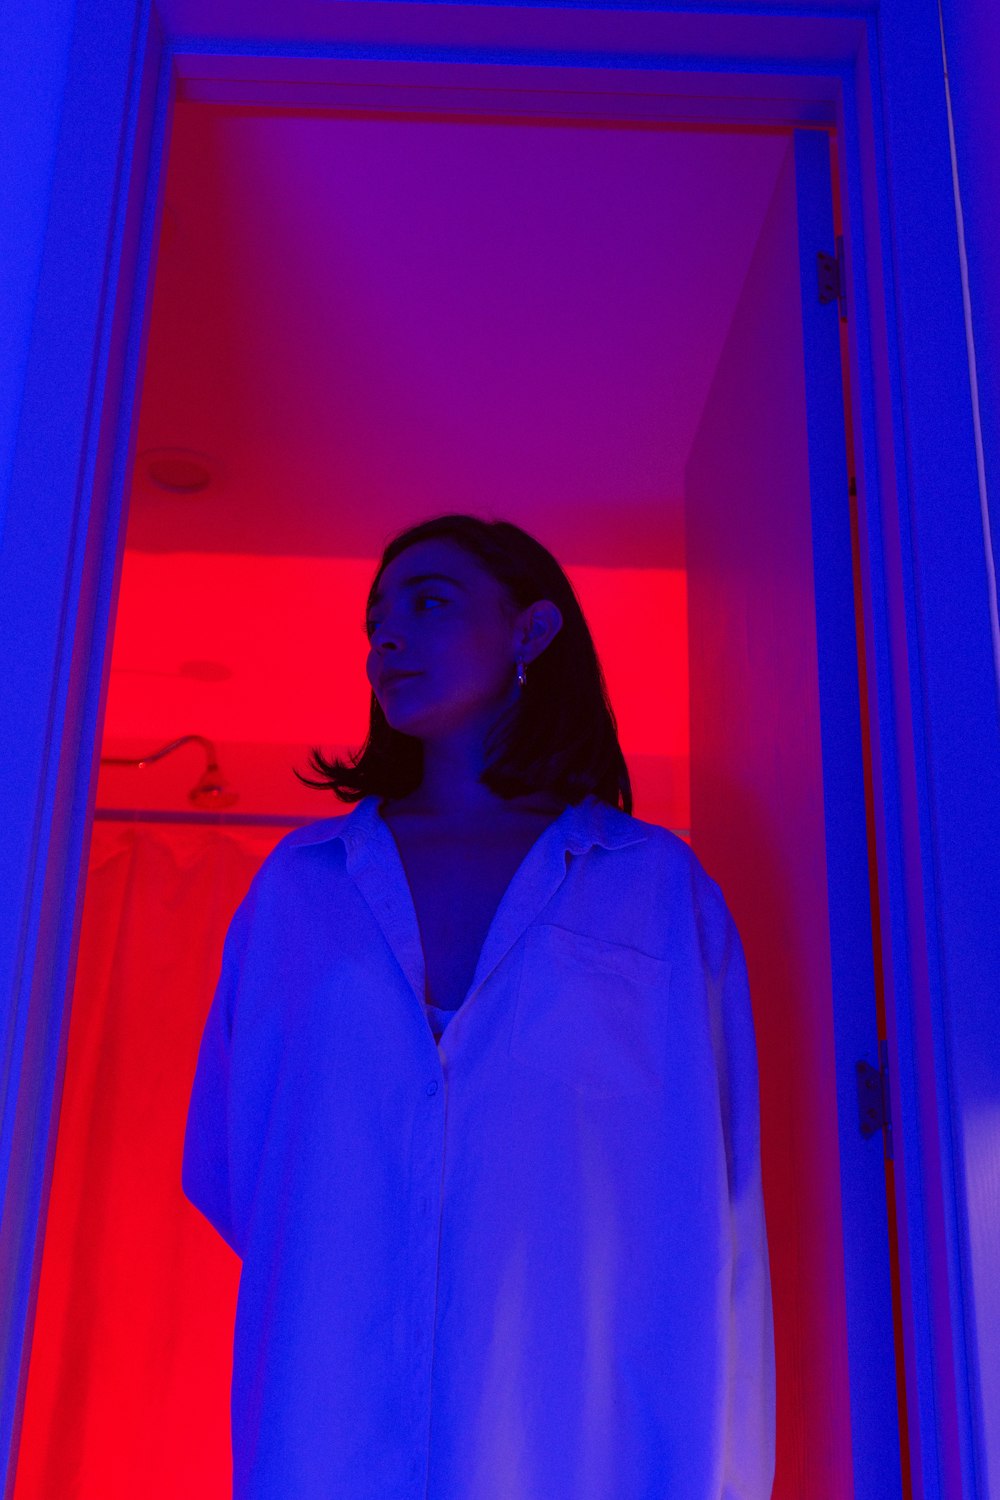 a woman standing in a room with a red and blue light